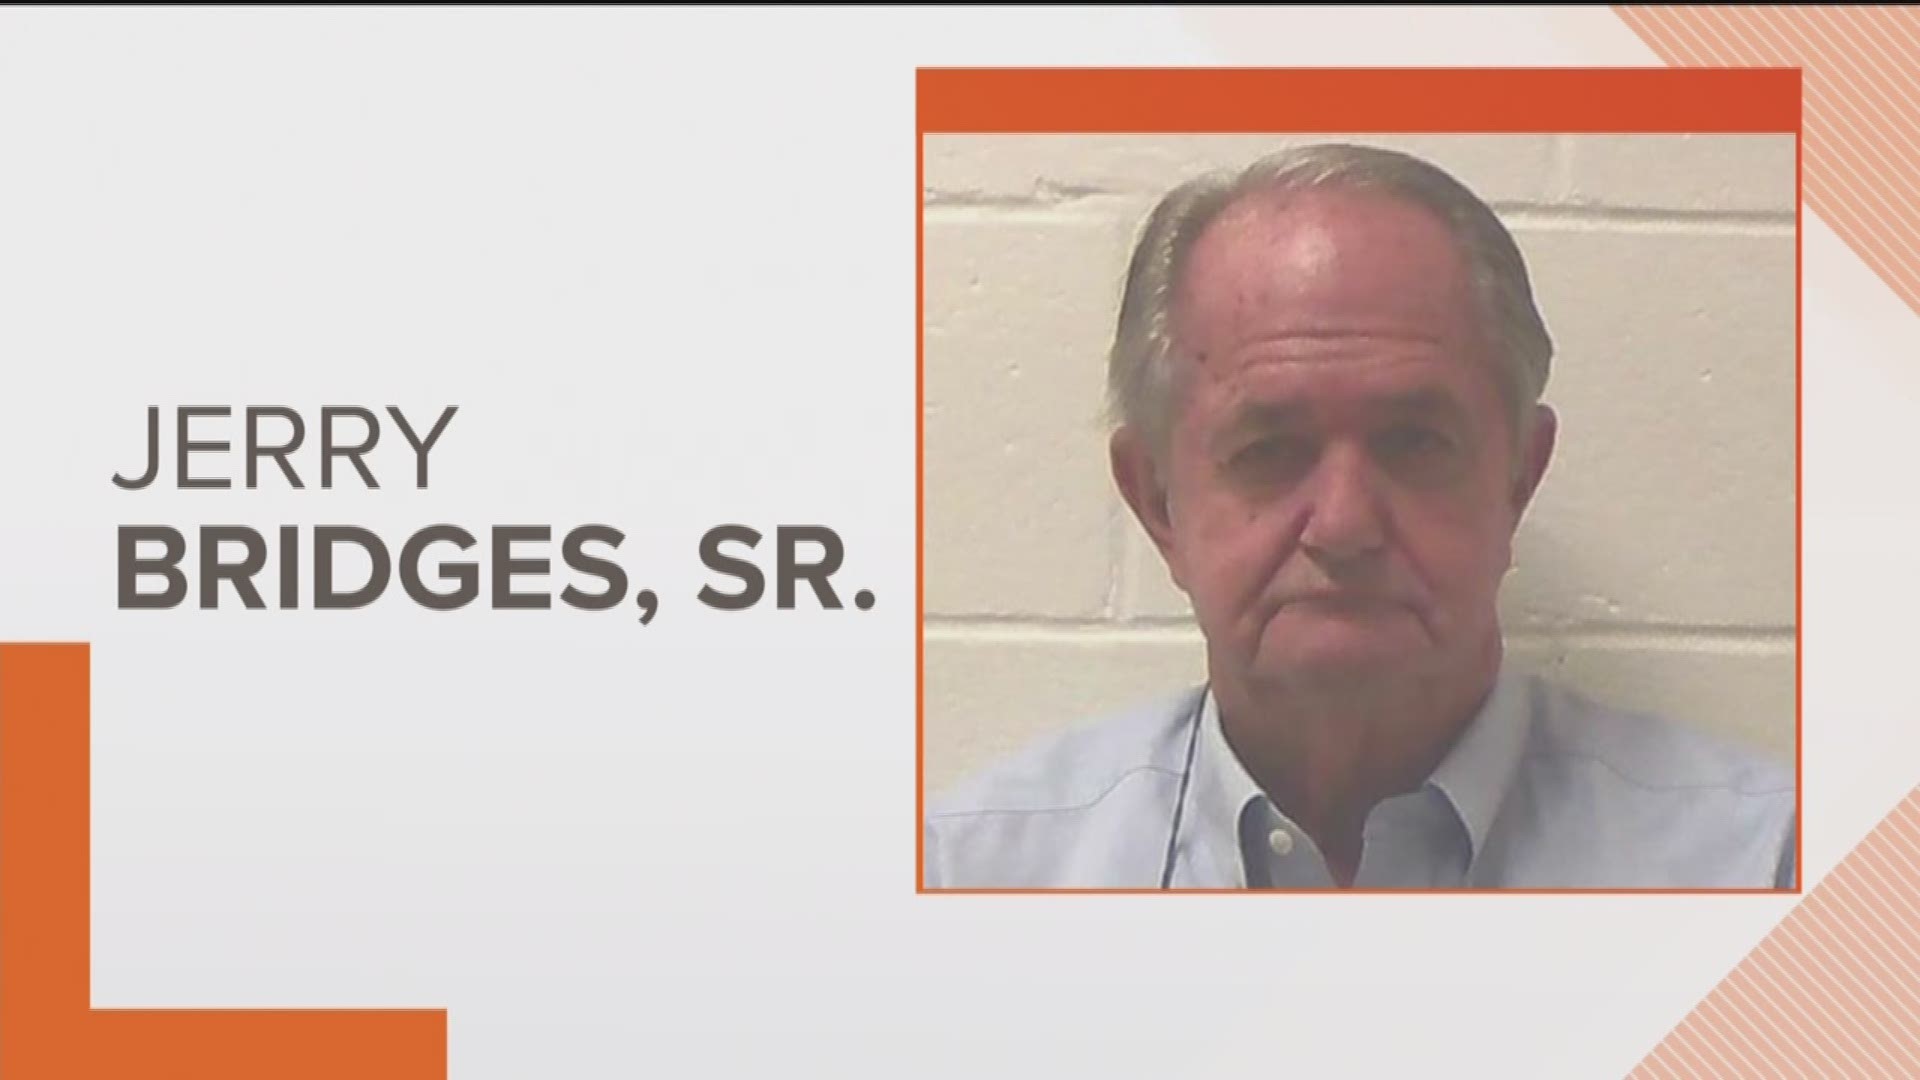 Jerry Bridges, Sr. is accused of 22 counts of theft by conversion and 2 counts of misappropriation of pre-needs tied to a cemetery he owns. He is free on $100,000 bond after an arrest Tuesday, according to Jones County Sheriff Butch Reece.